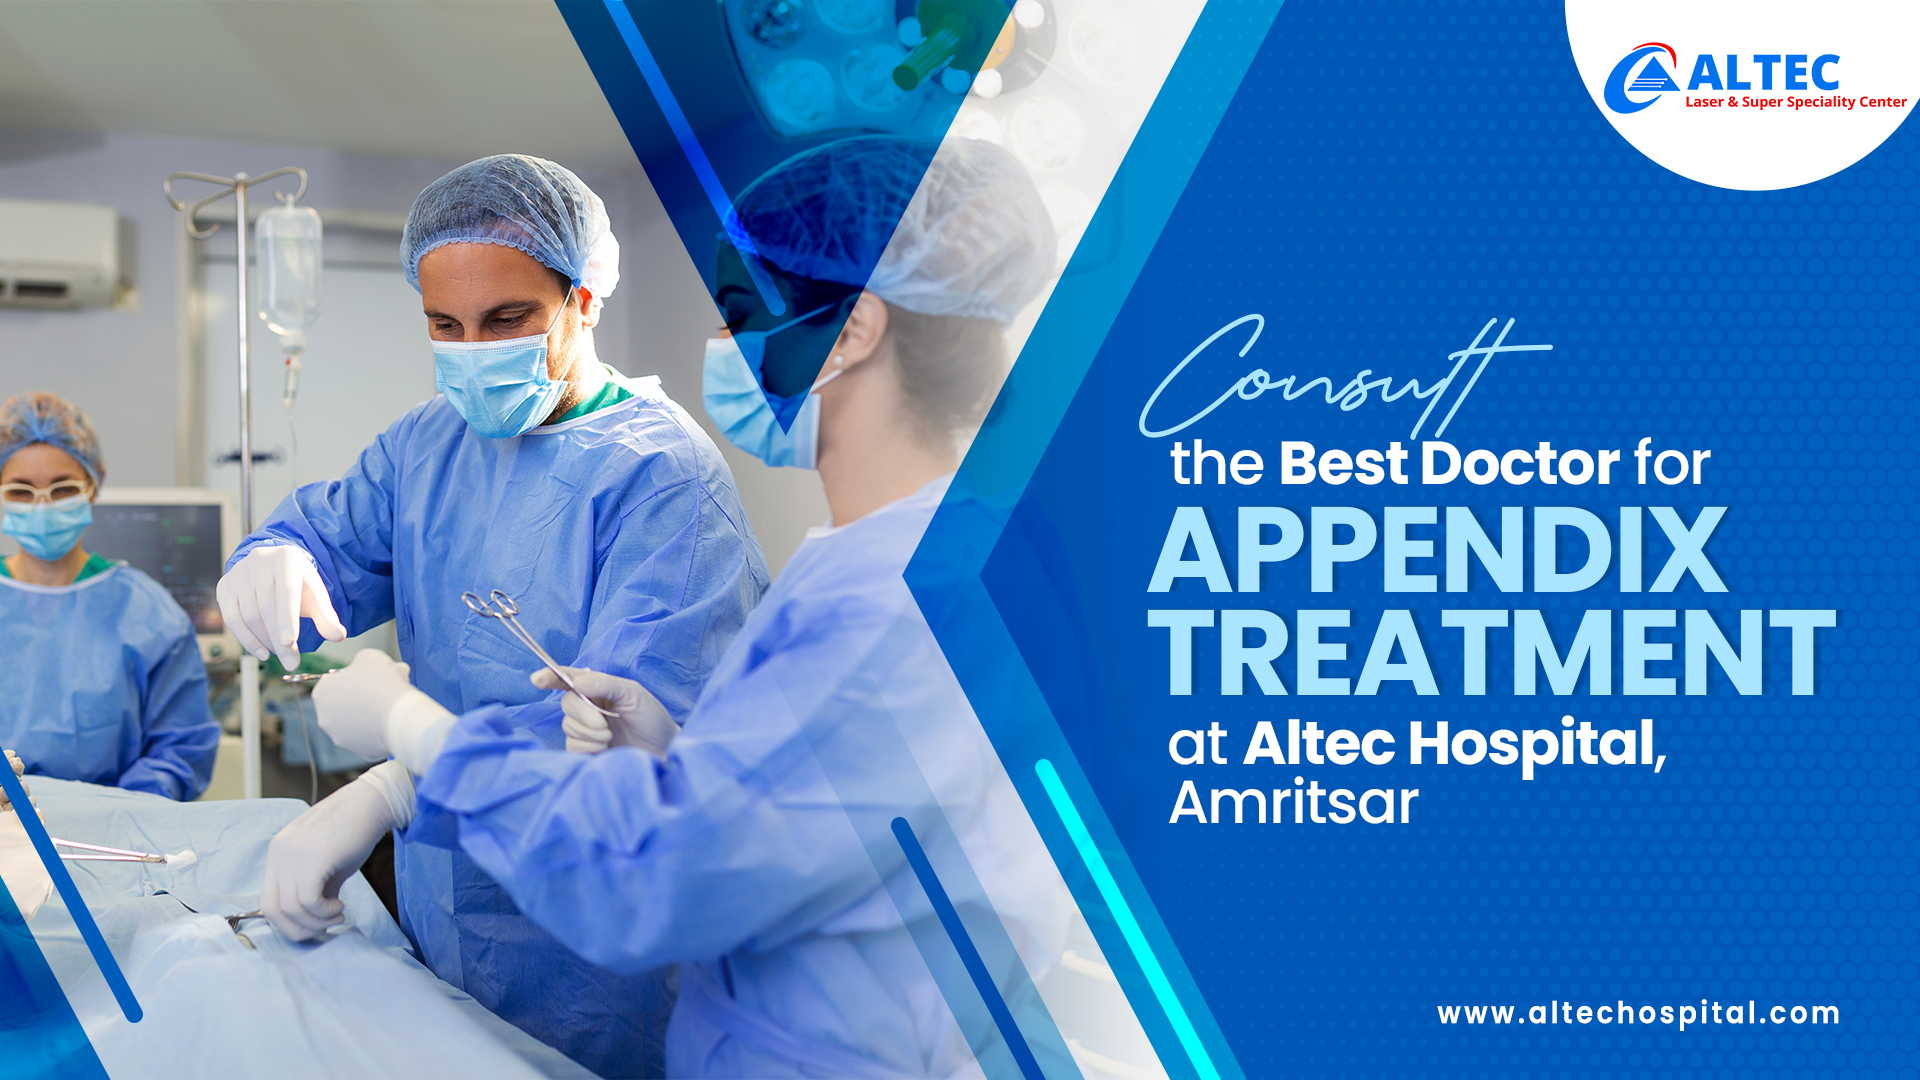 Consult the Best Doctor for Appendix Treatment at Altec Hospital, Amritsar